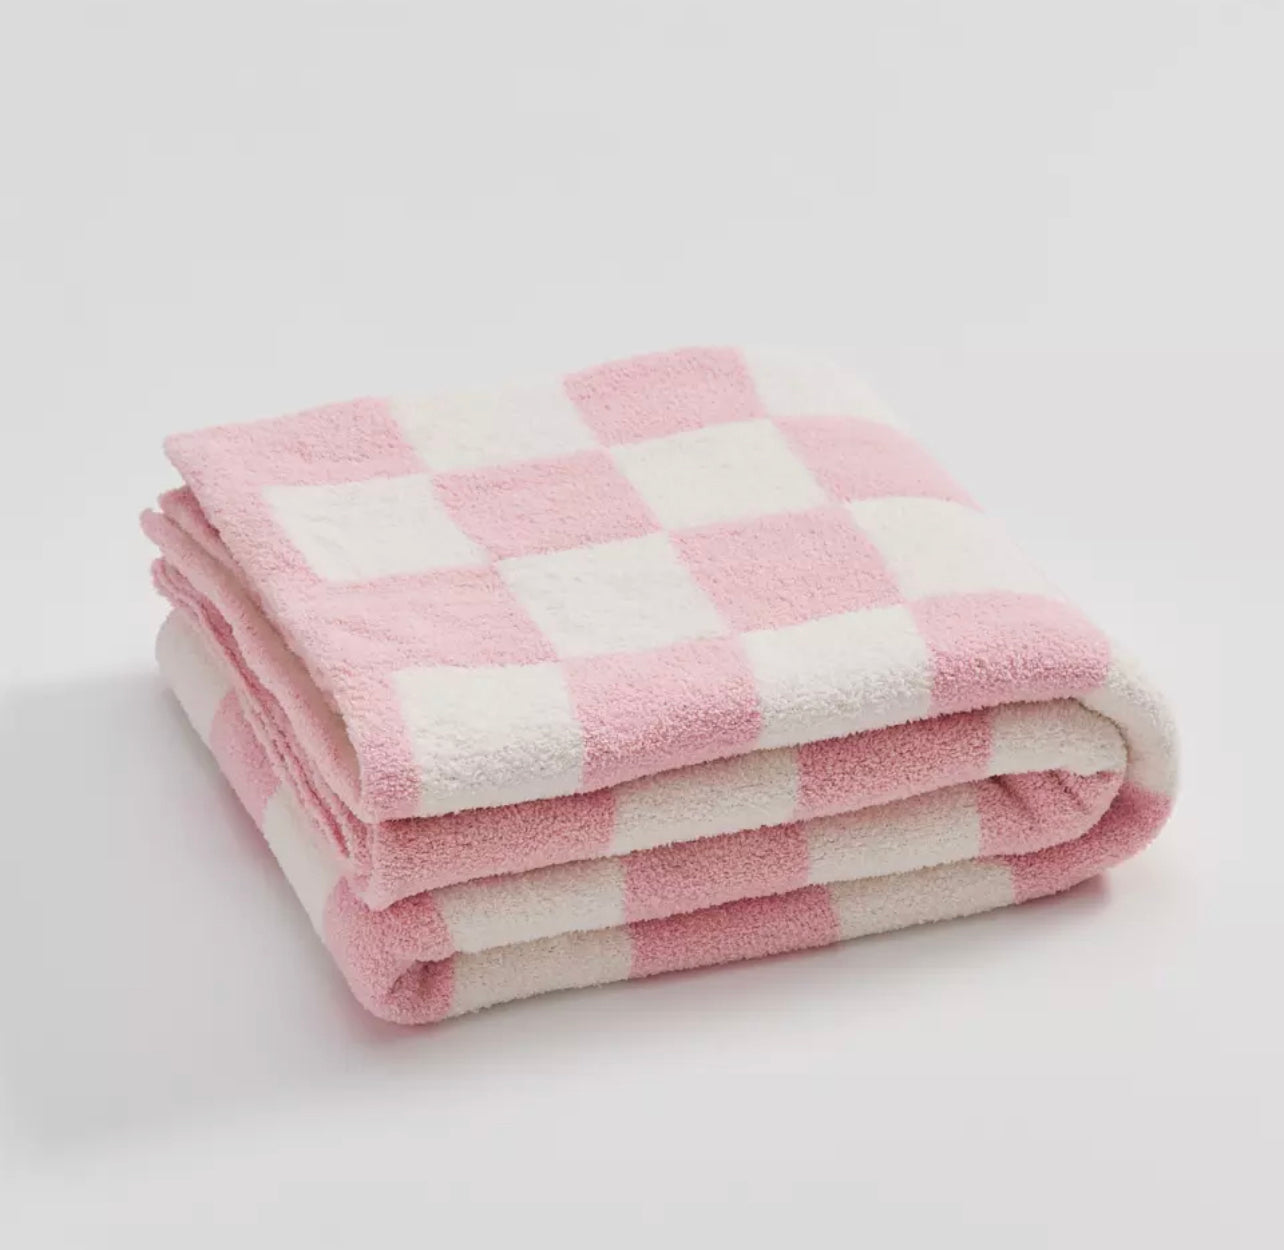 Checker board knit blanket (more colors and sizes)